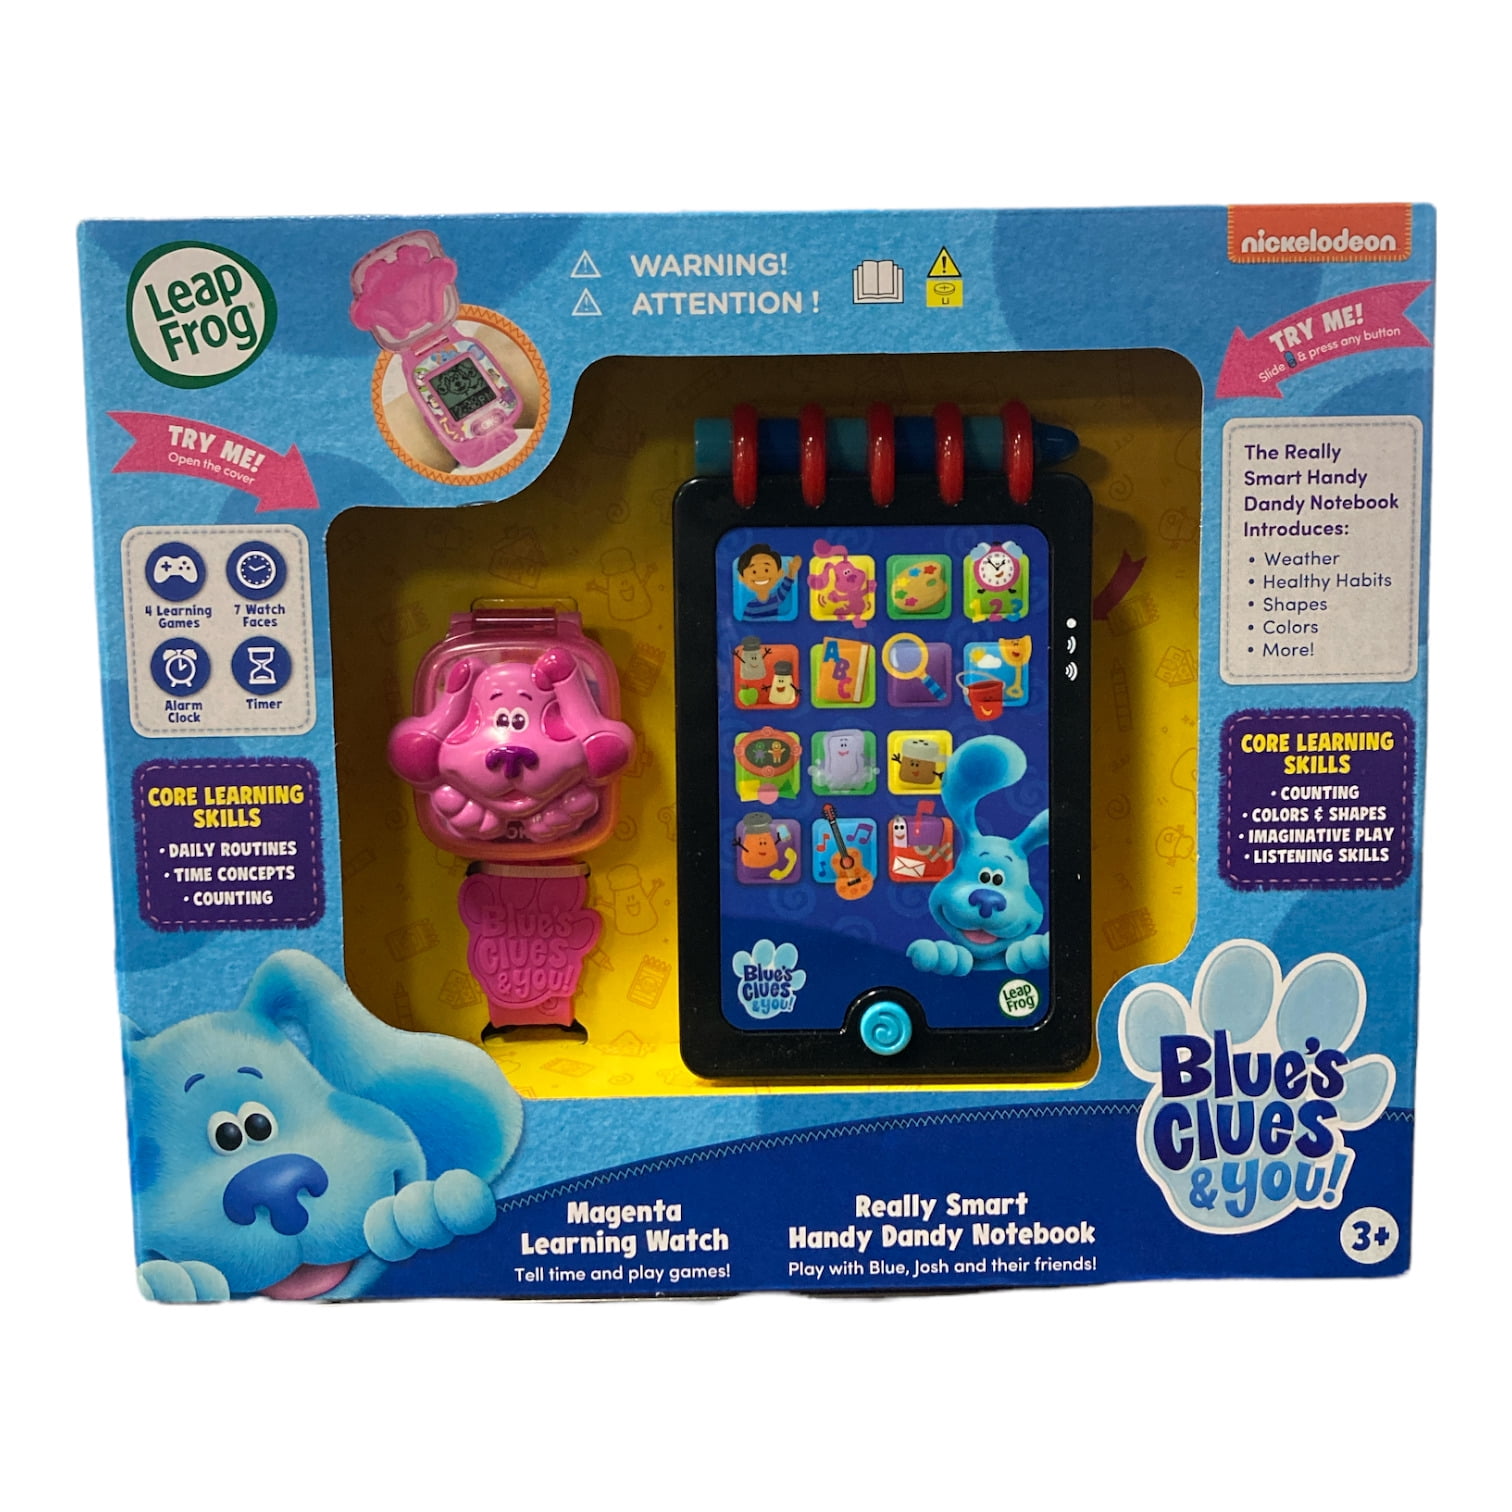 LeapFrog Blue's Clues & You! Really Smart Handy Dandy Notebook $7.83 + Free Shipping w/ Walmart+ or on $35+